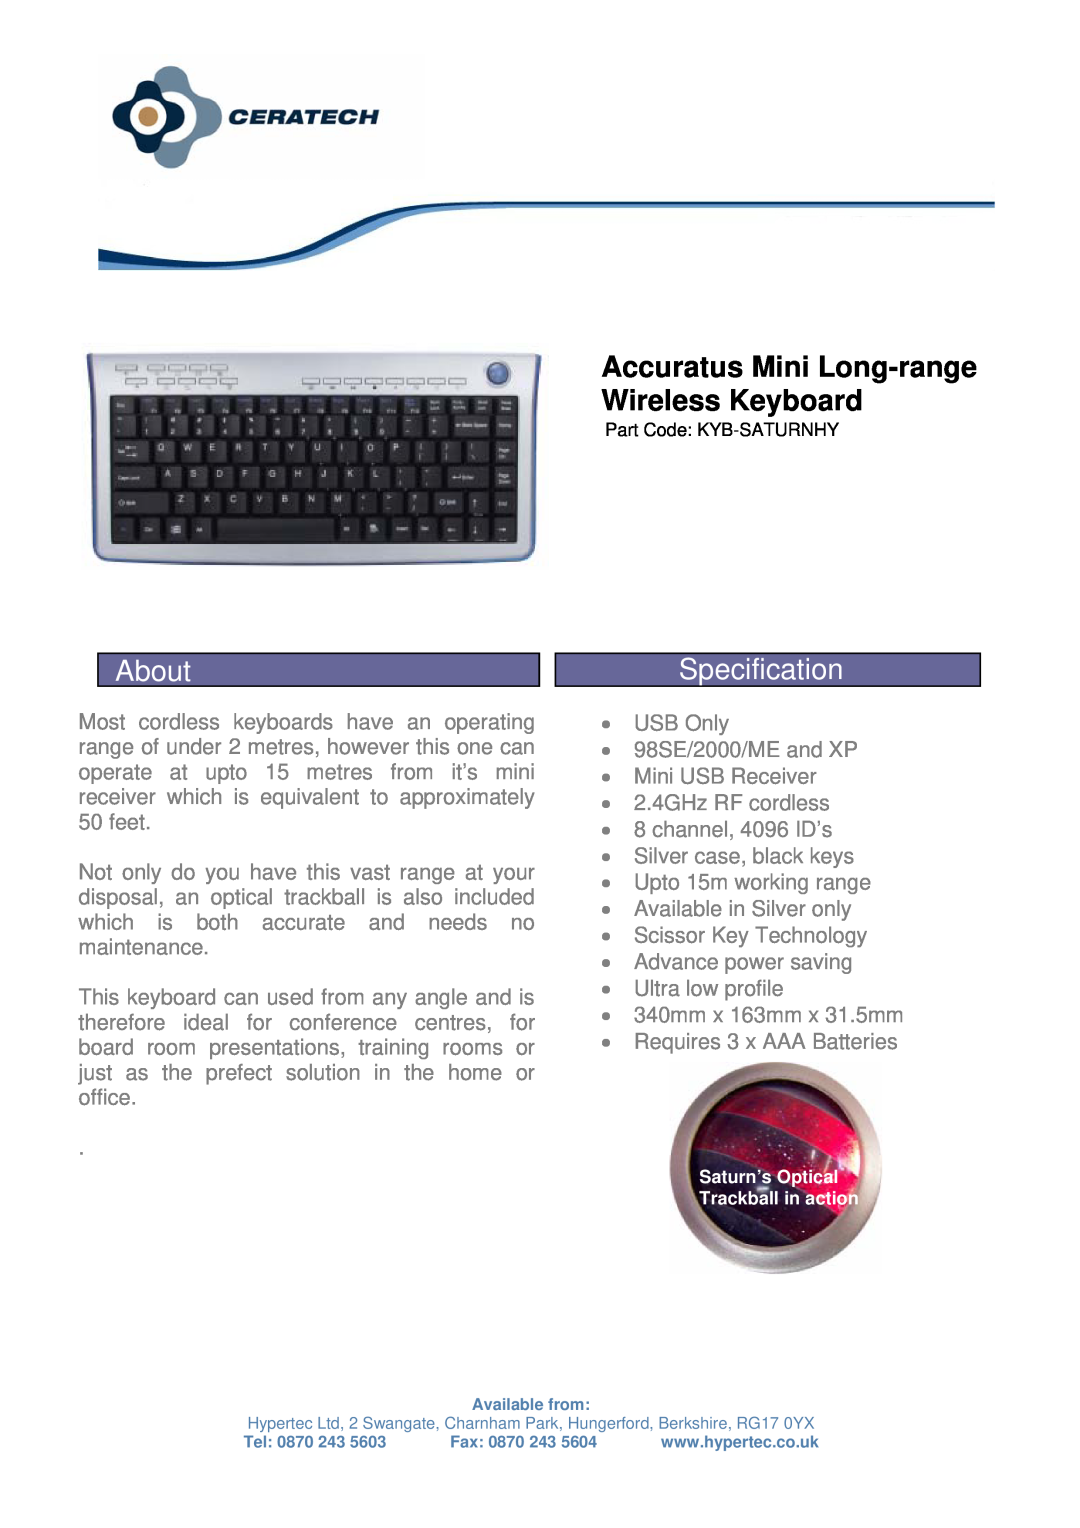 Hypertec KYB-SATURNHY manual About, Accuratus Mini Long-range Wireless Keyboard, Specification 